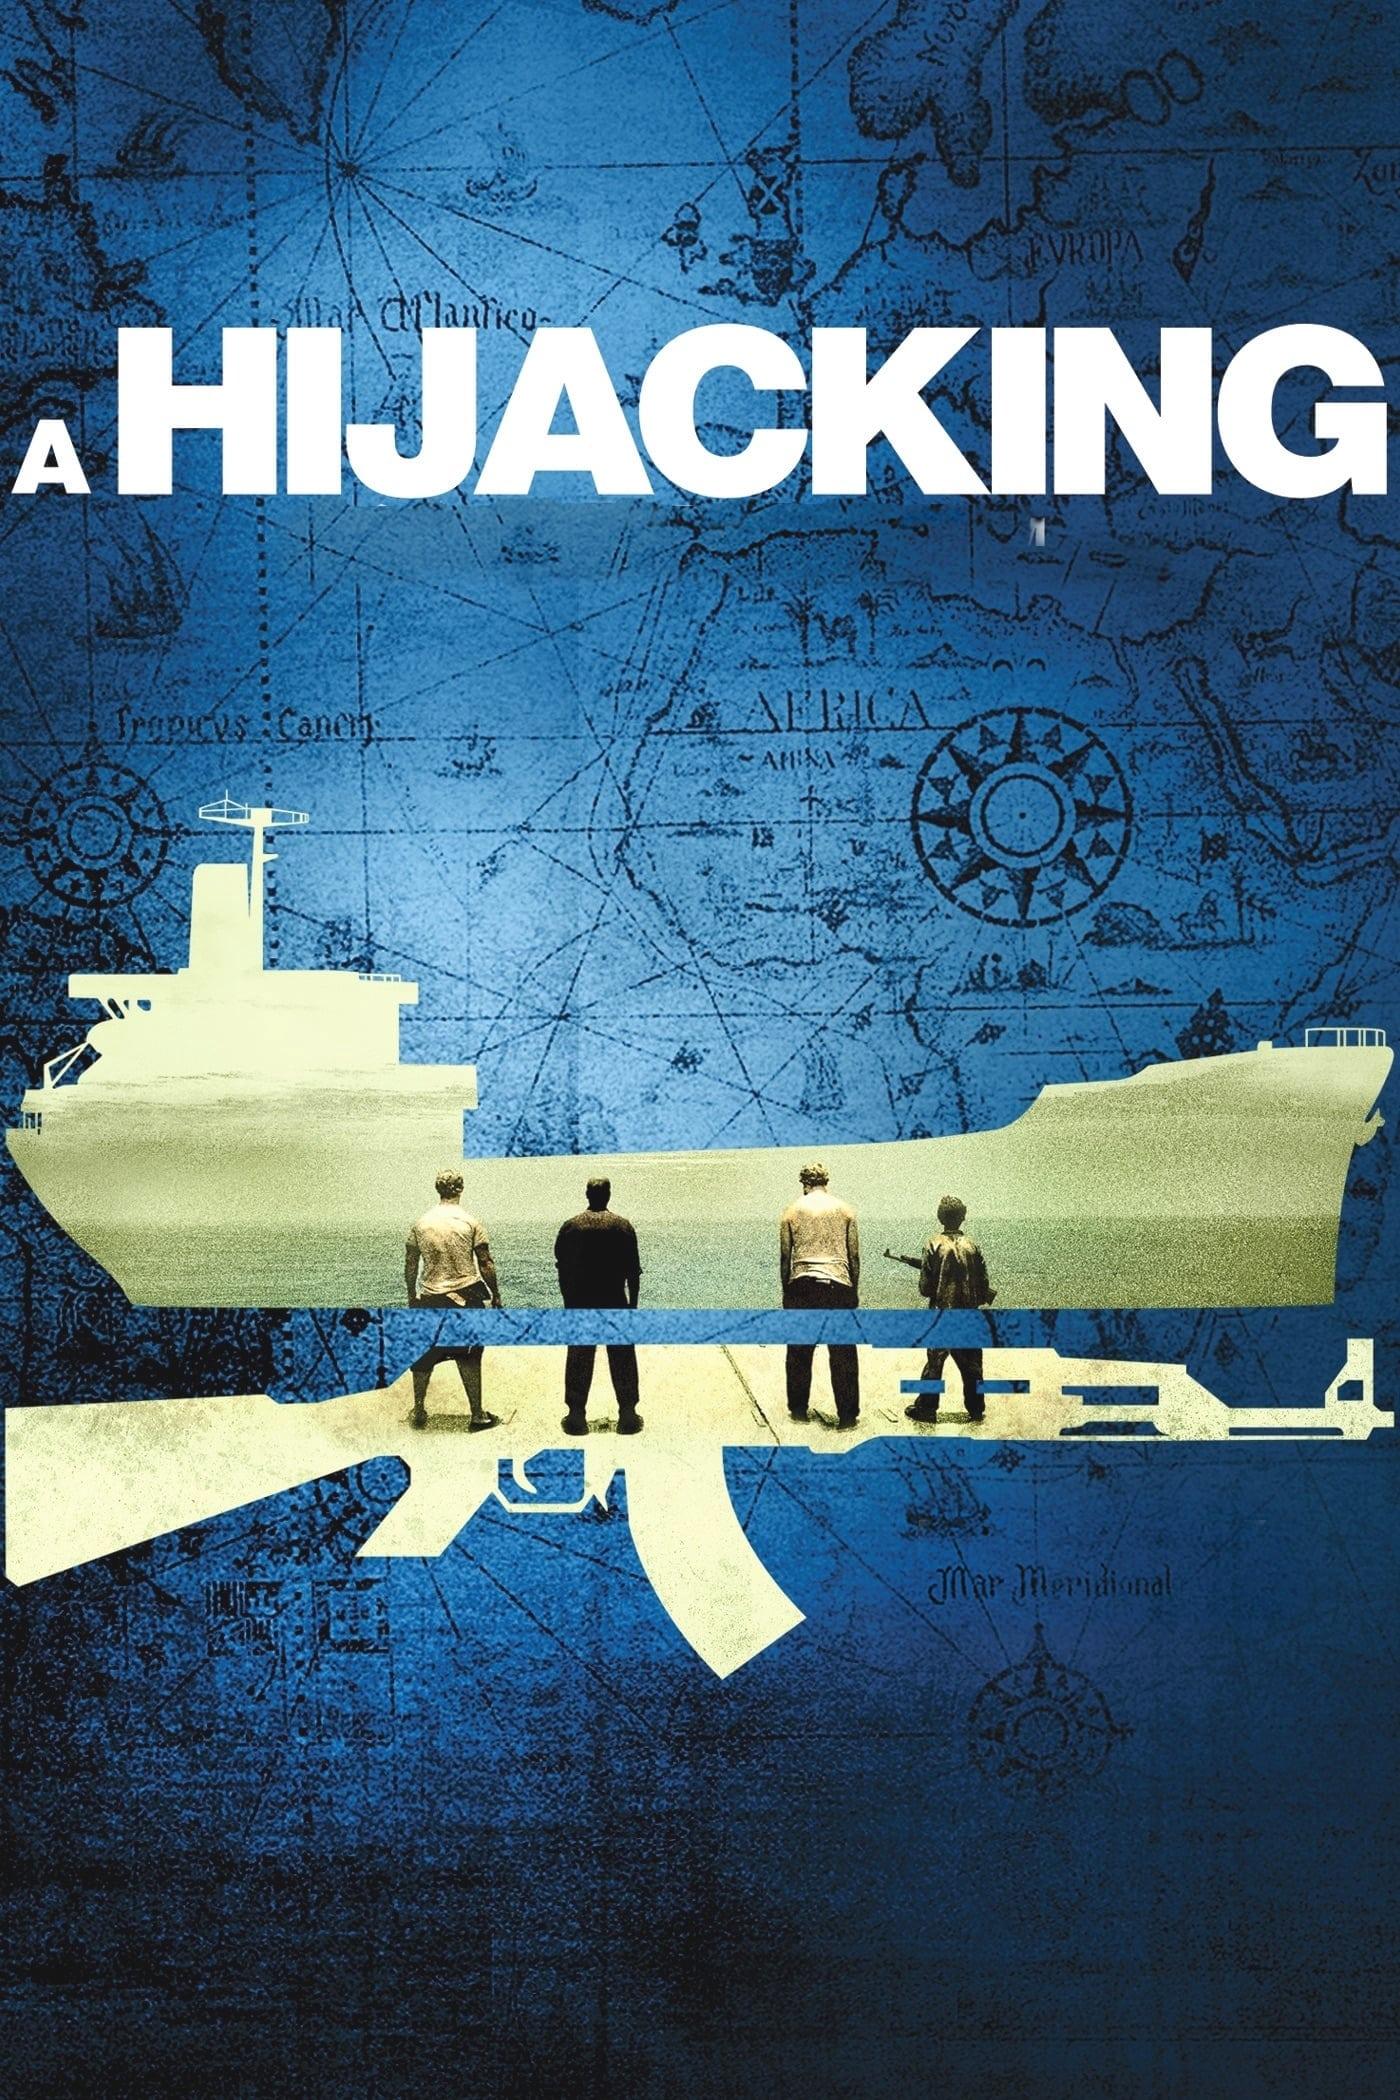 A Hijacking poster